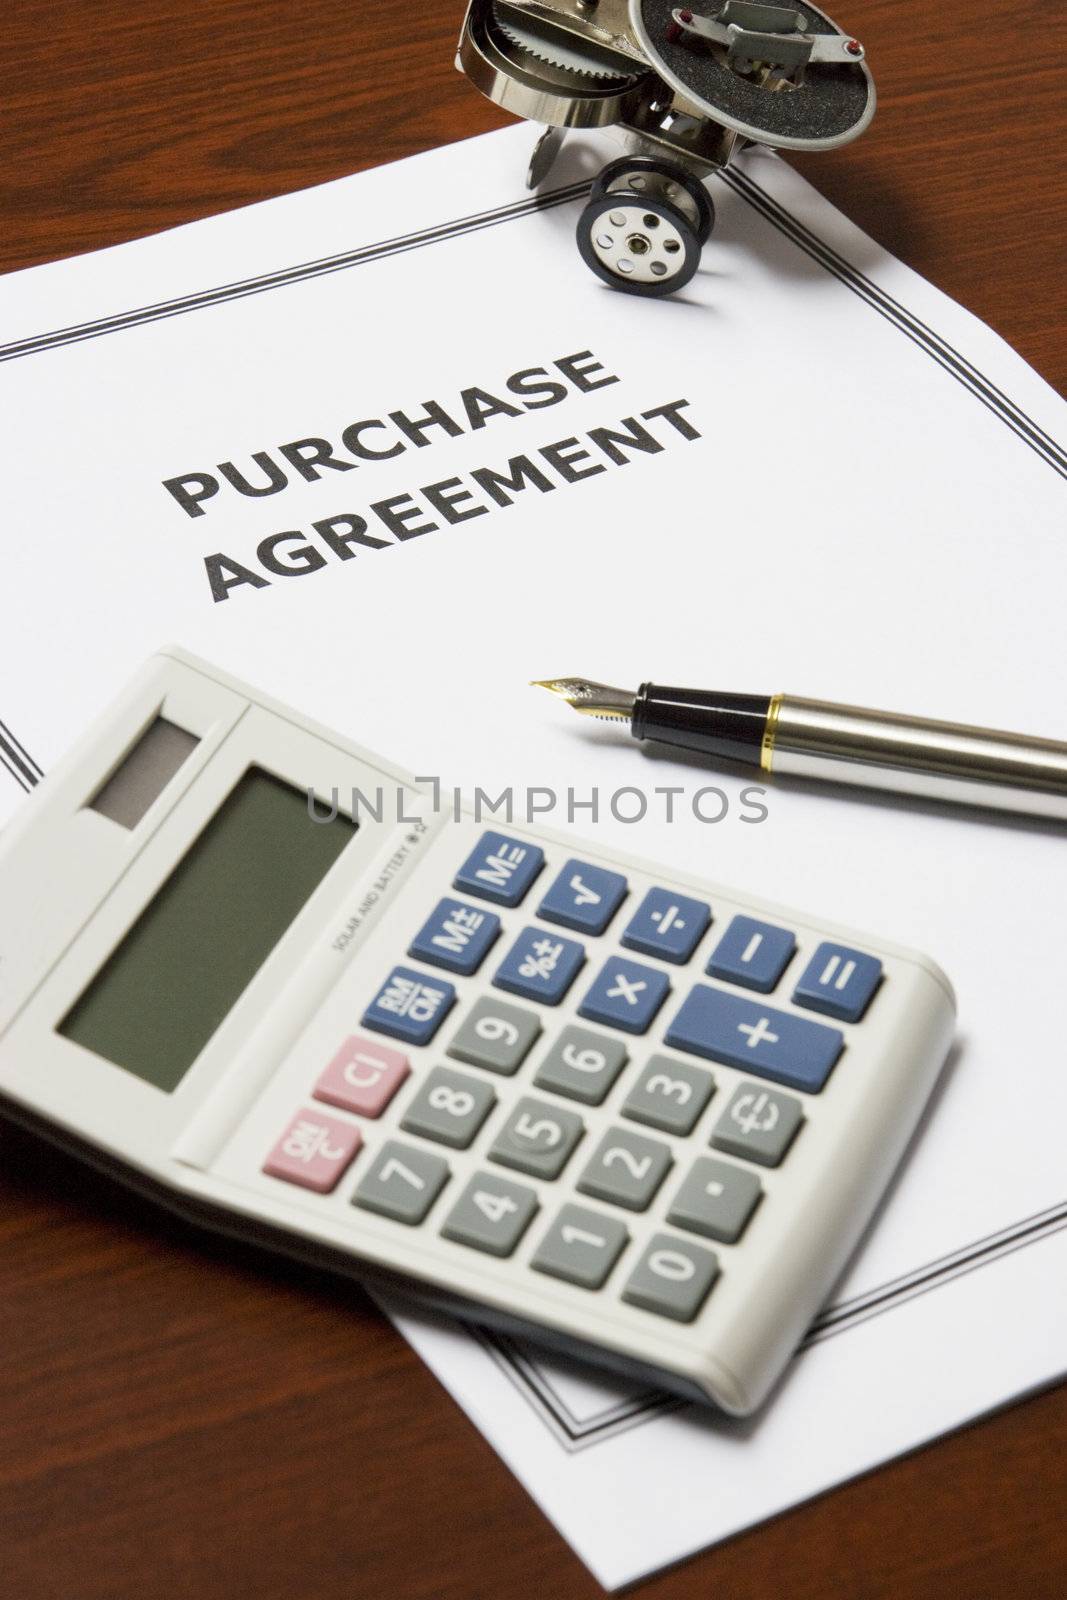 Image of a purchase agreement on an office table.